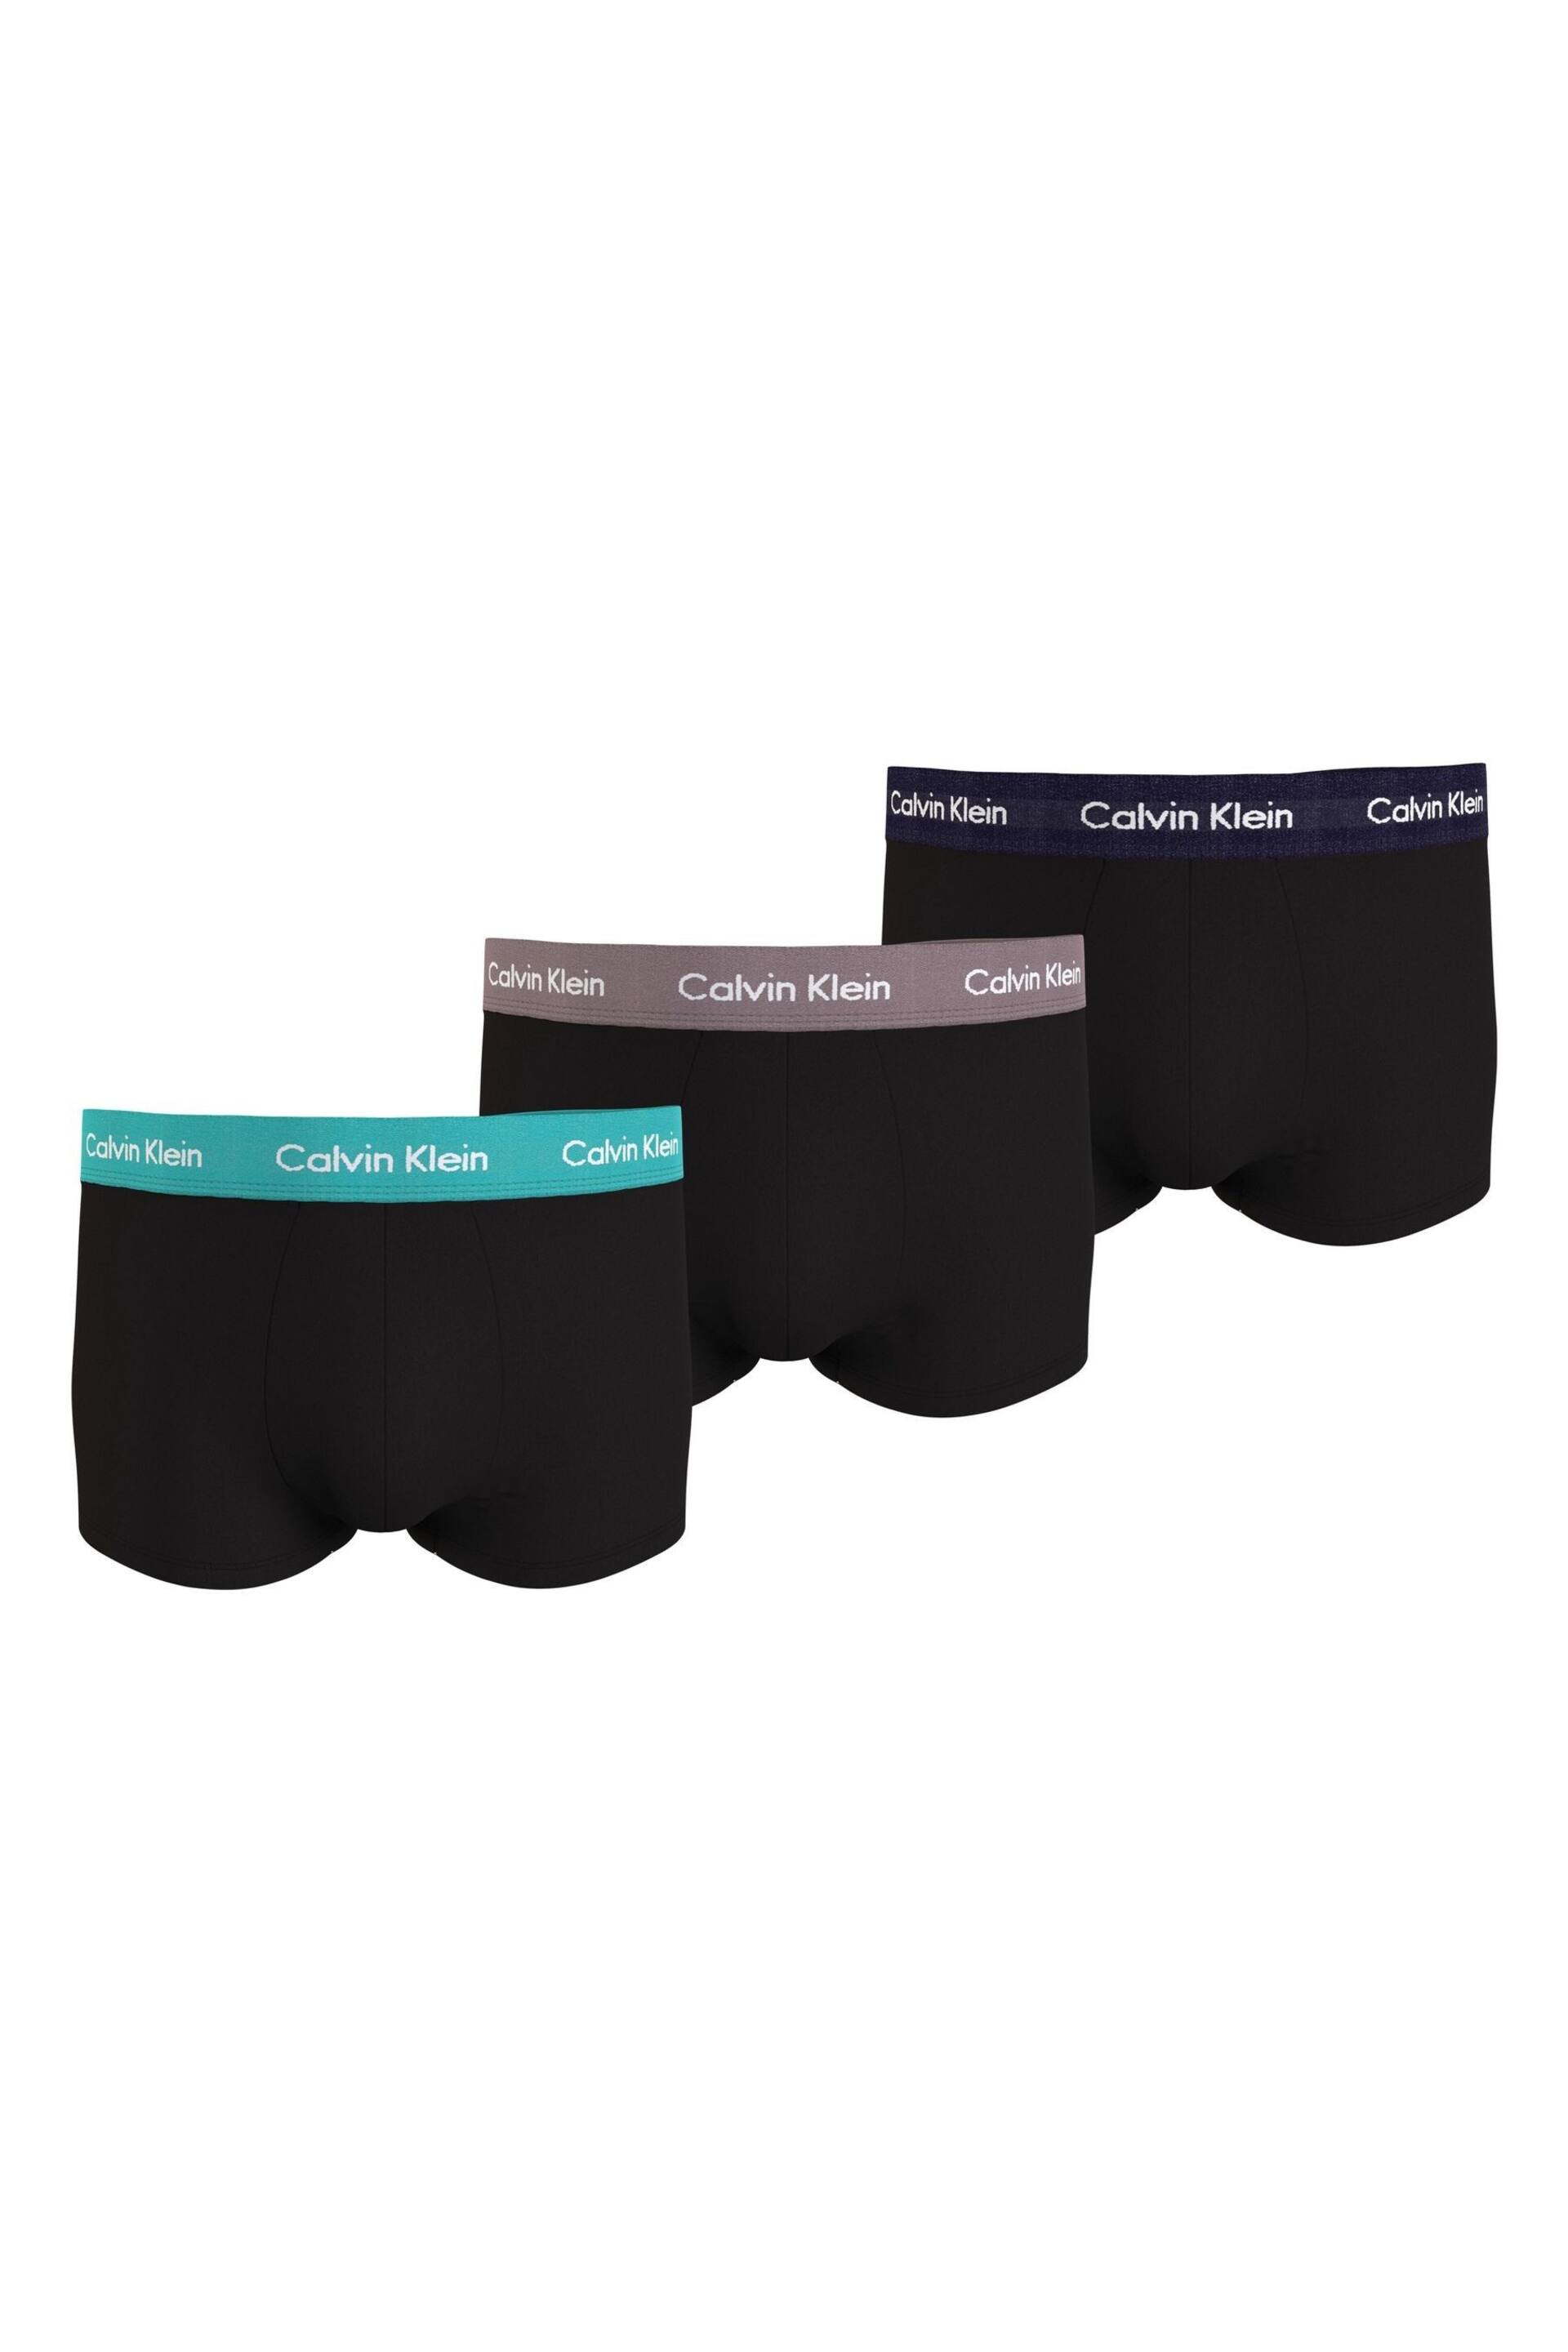 Calvin Klein Black Low Rise Boxers 3 Pack - Image 1 of 2